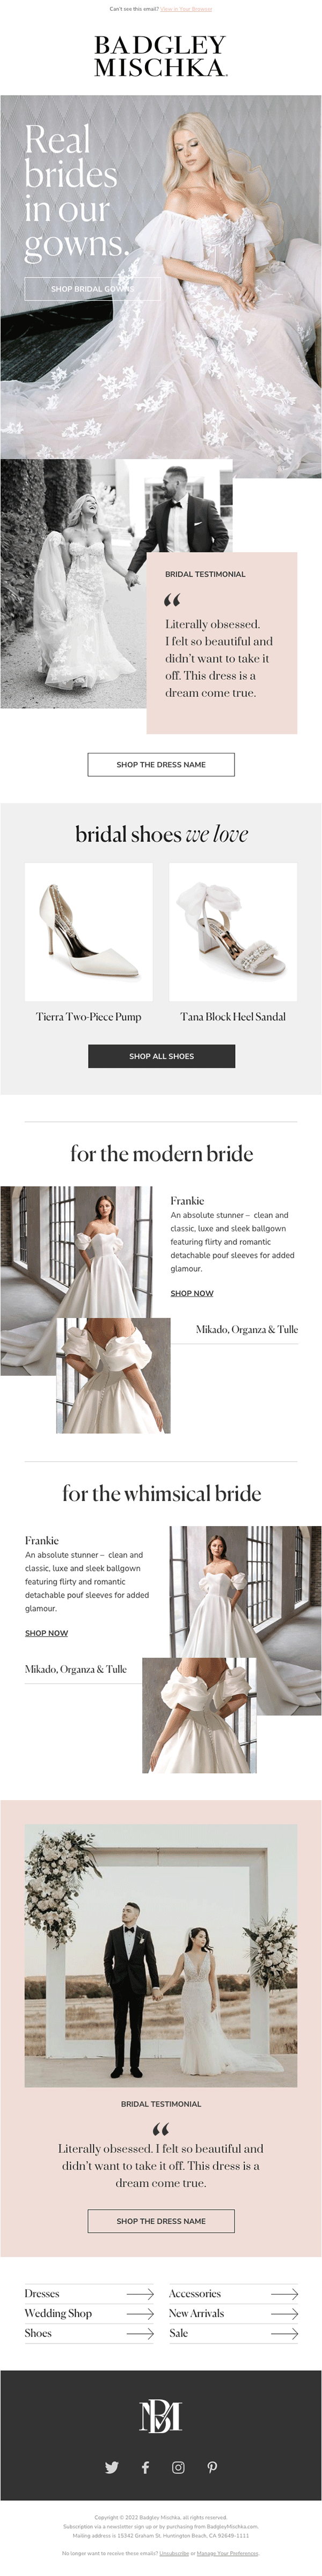 Example of animation in Badgley Mischka's email marketing campaign 